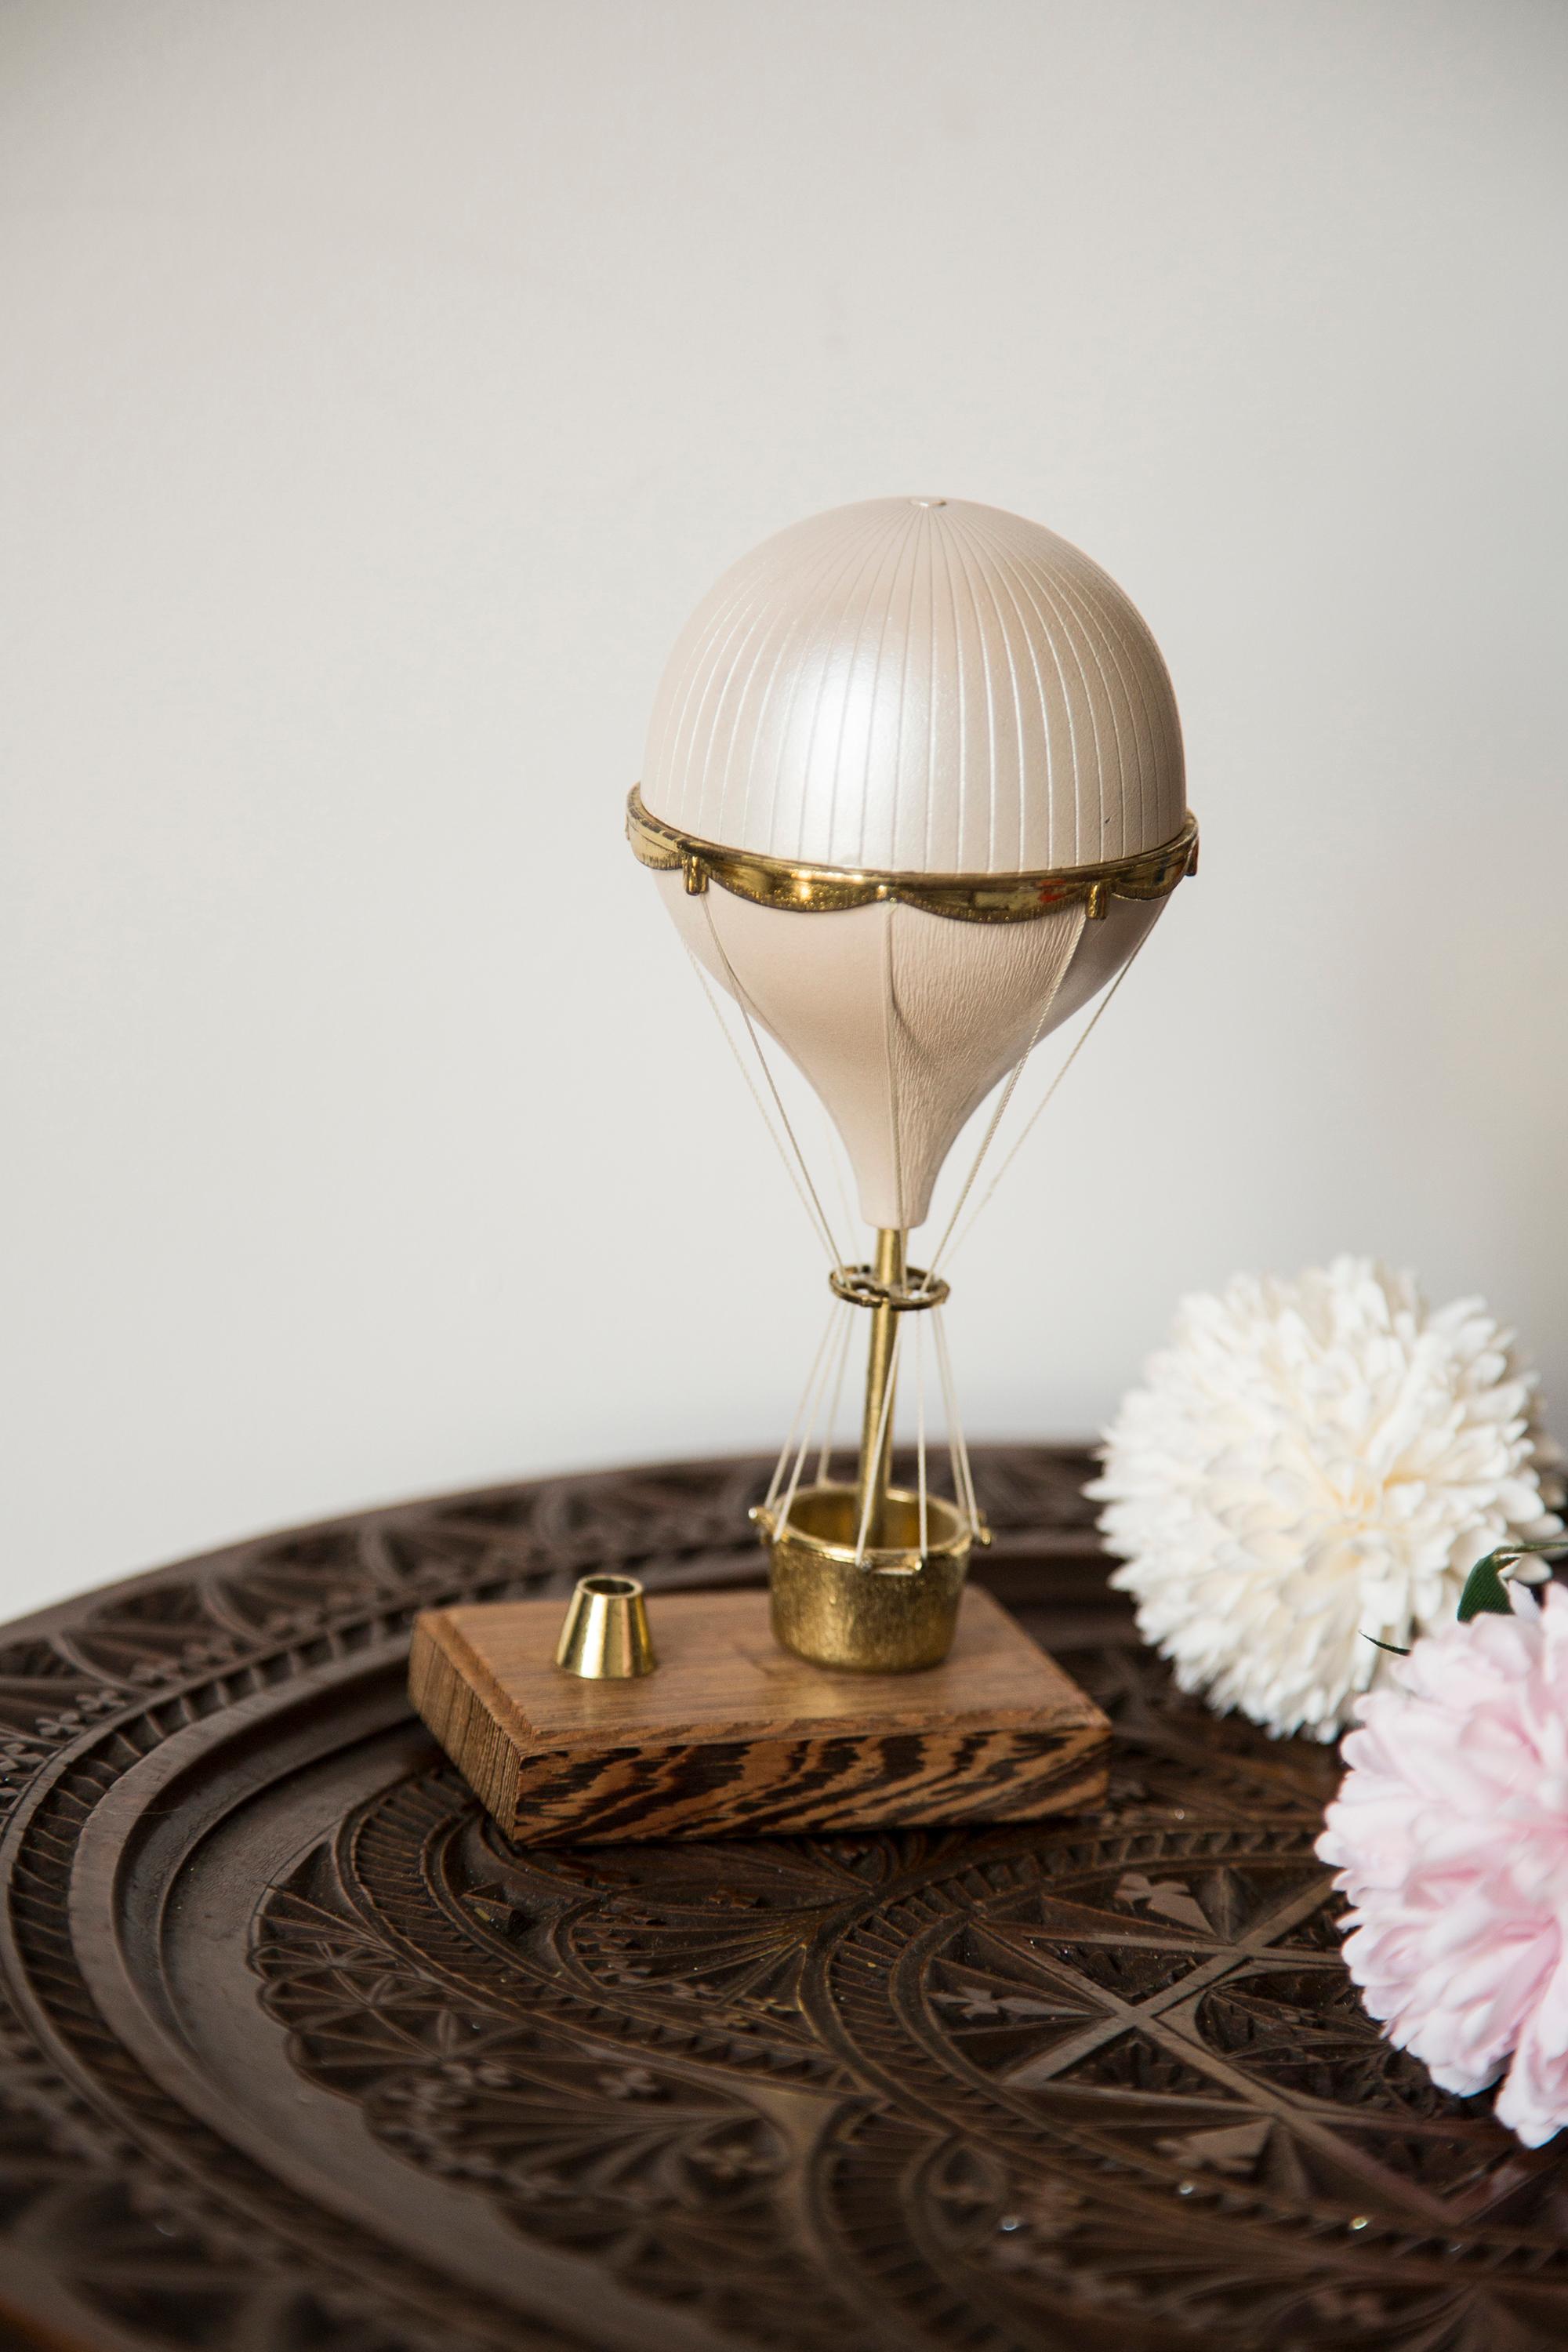 French Midcentury Decorative Balloon Stand for Pen, Inkwell, Sculpture, France, 1960s